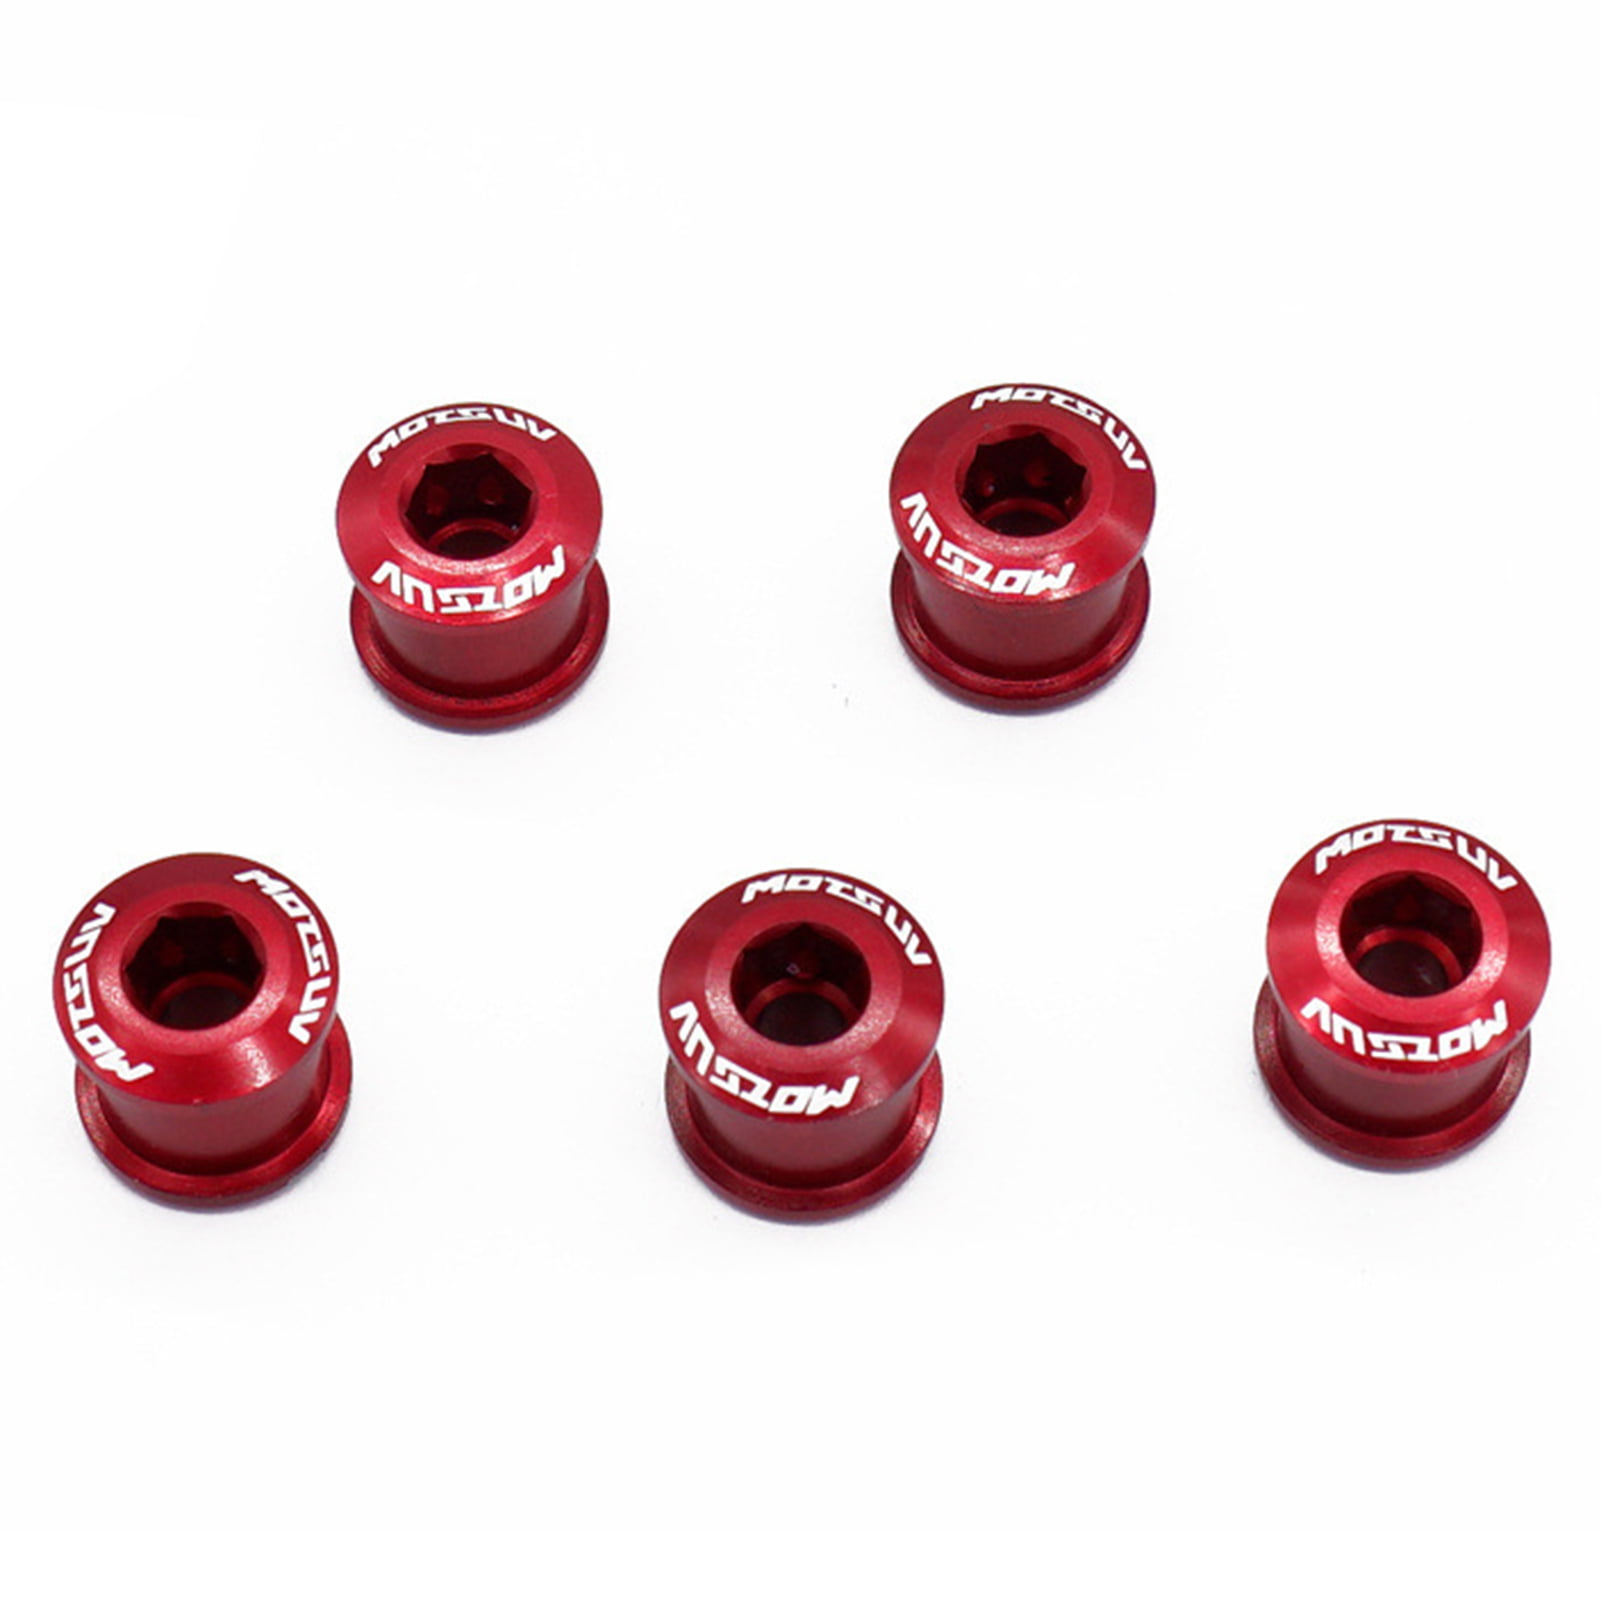 RED New Zoagear 7075 Alloy Bike Bicycle Double Chainring Bolts Crank Set 